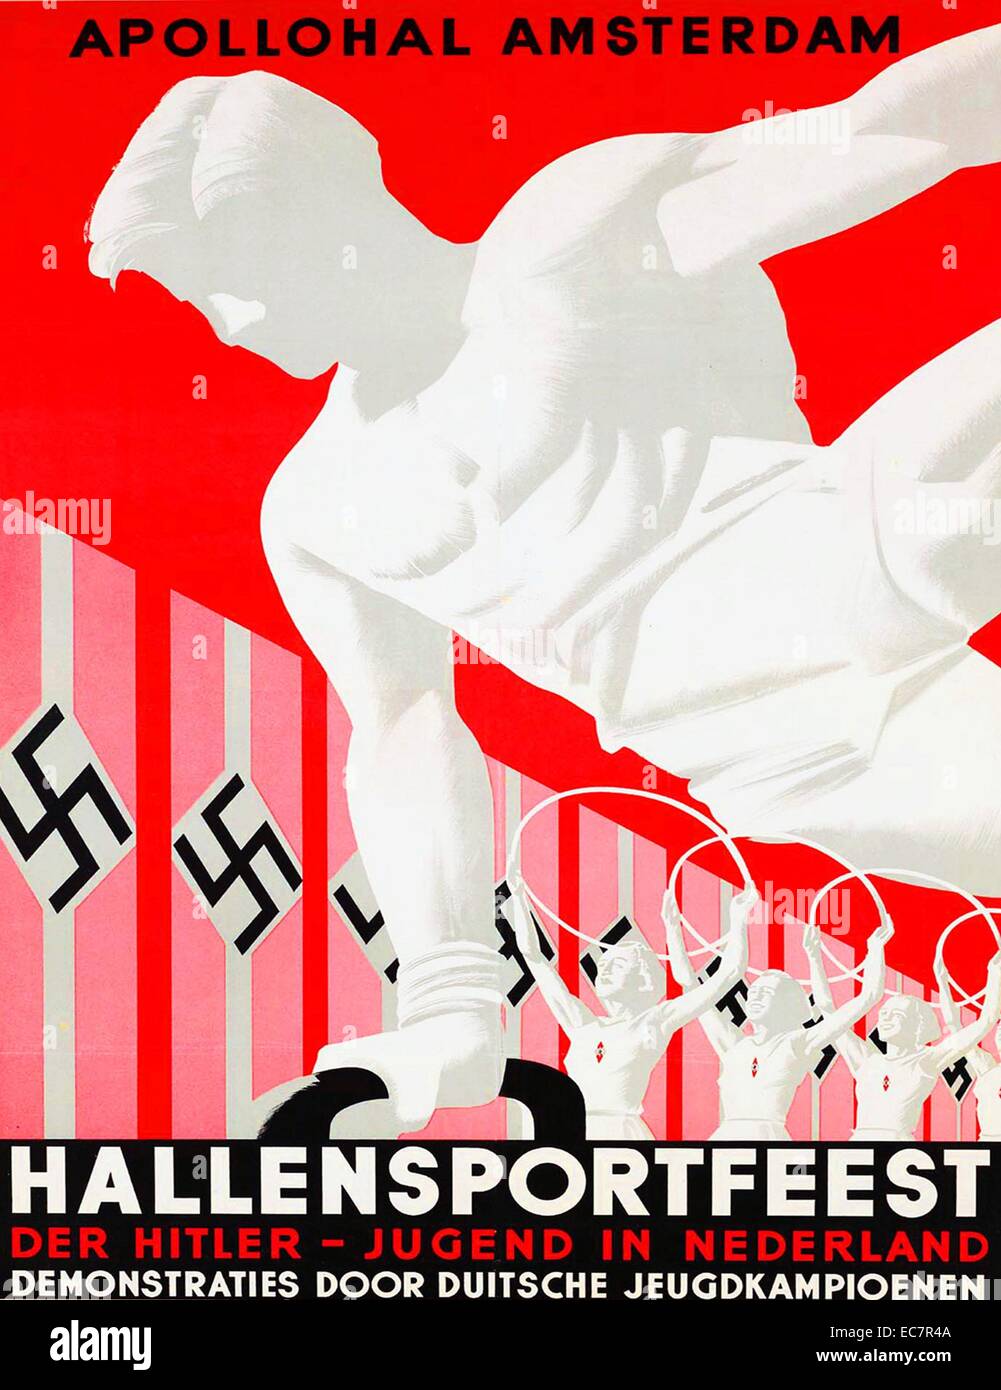 Poster for the 1943 Apollohal Amsterdam - the sports festival of the Dutch Hitler Youth. Features a display by the German youth gymnastic champions. Stock Photo